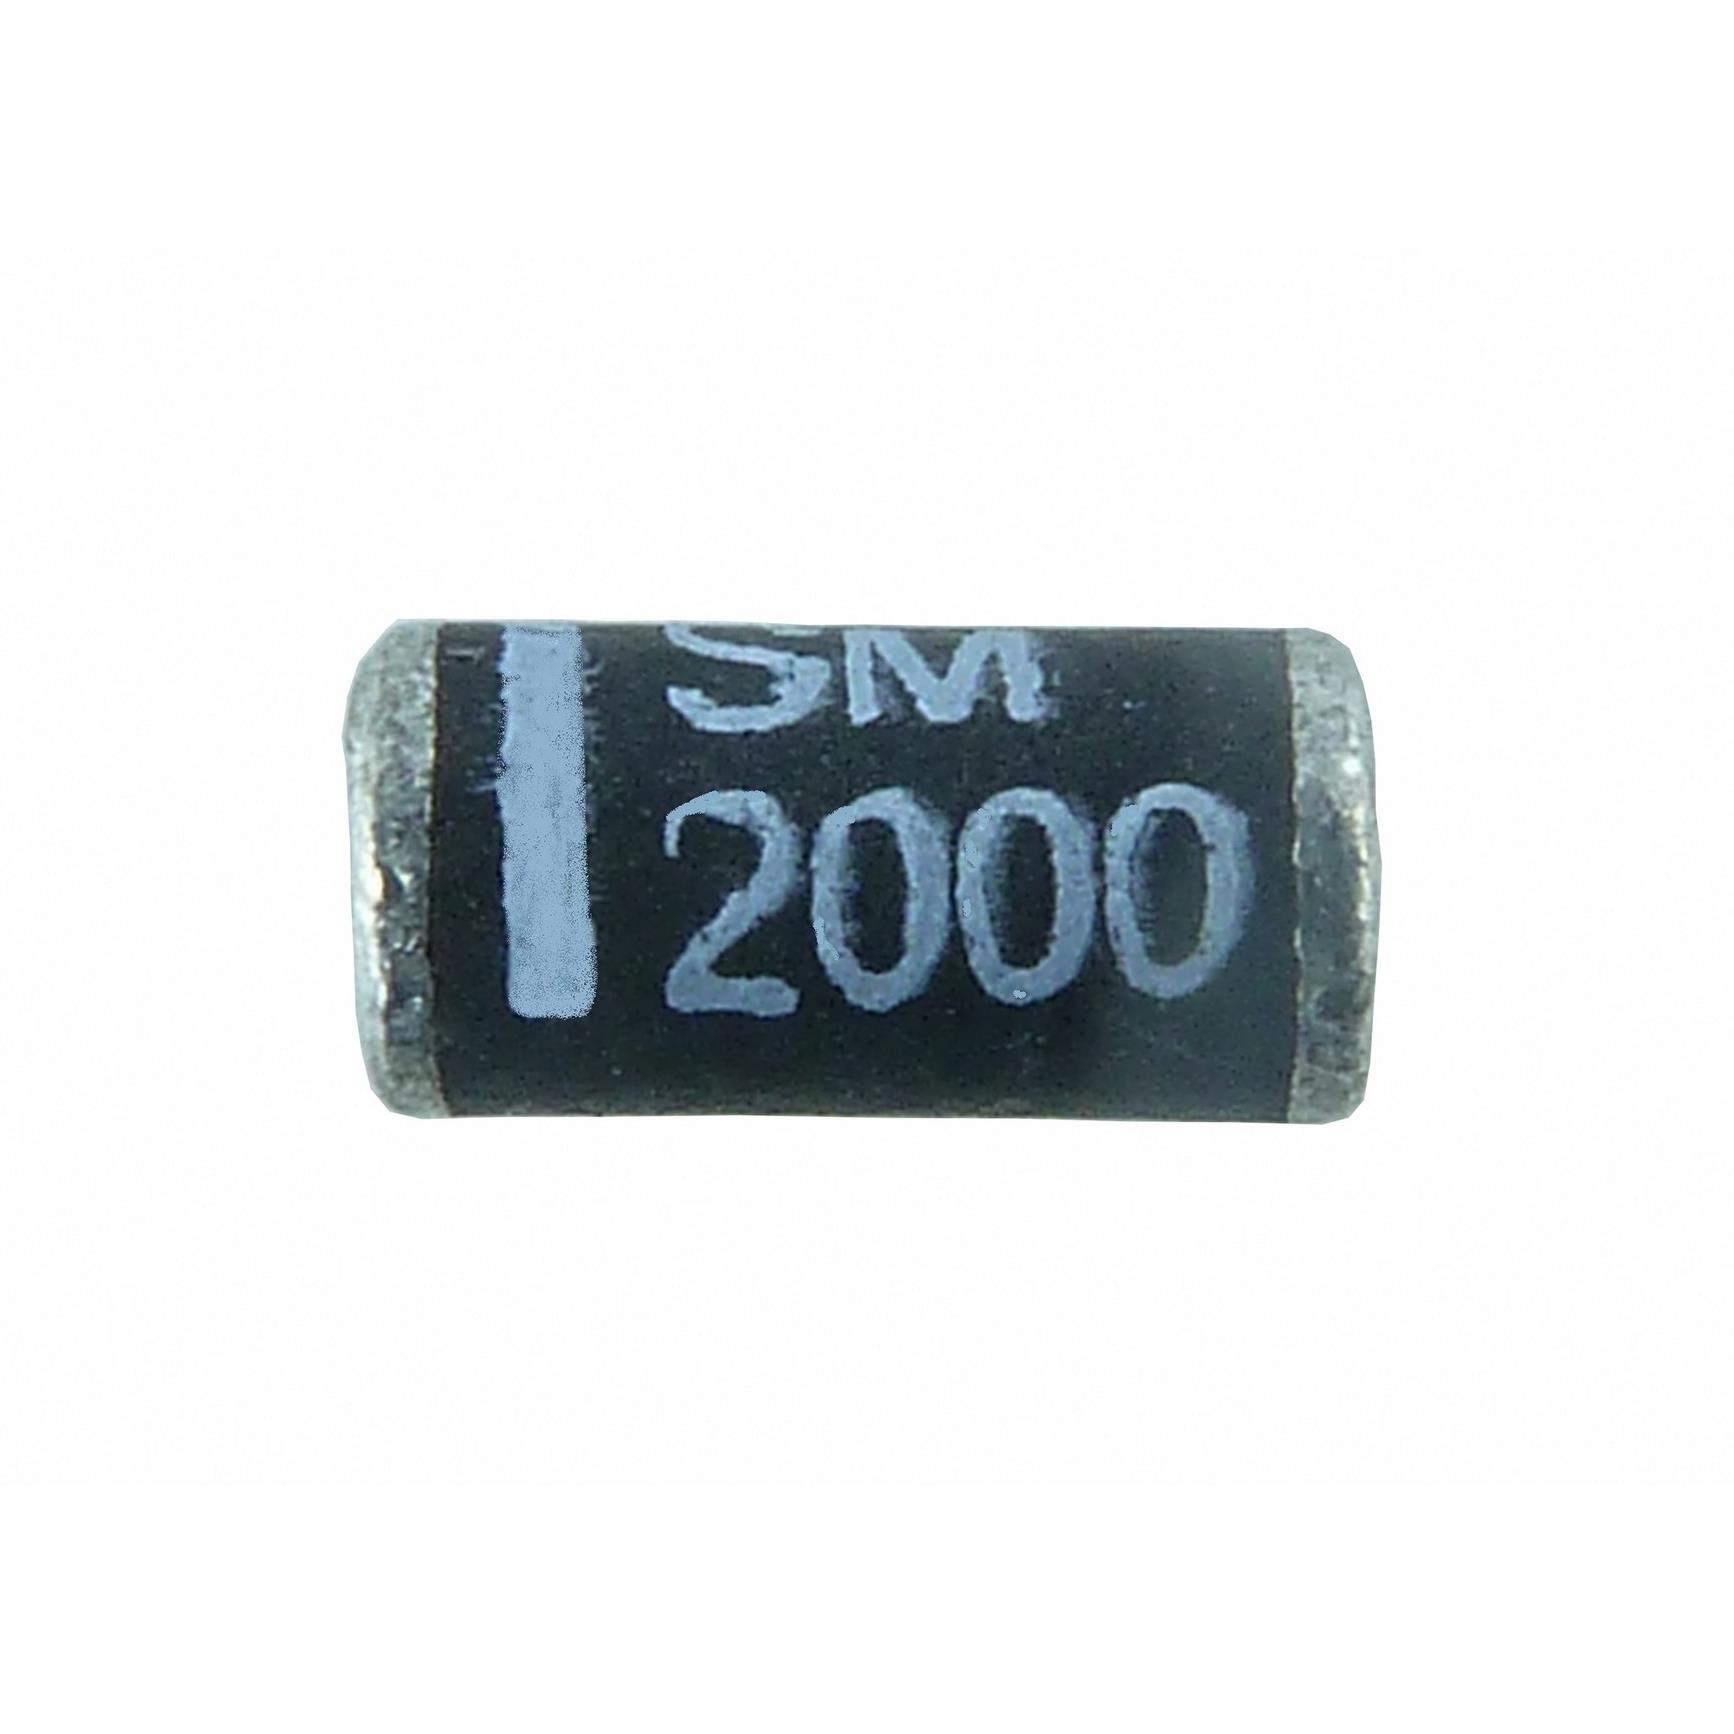 the part number is LDP01-39AYD2-AQ